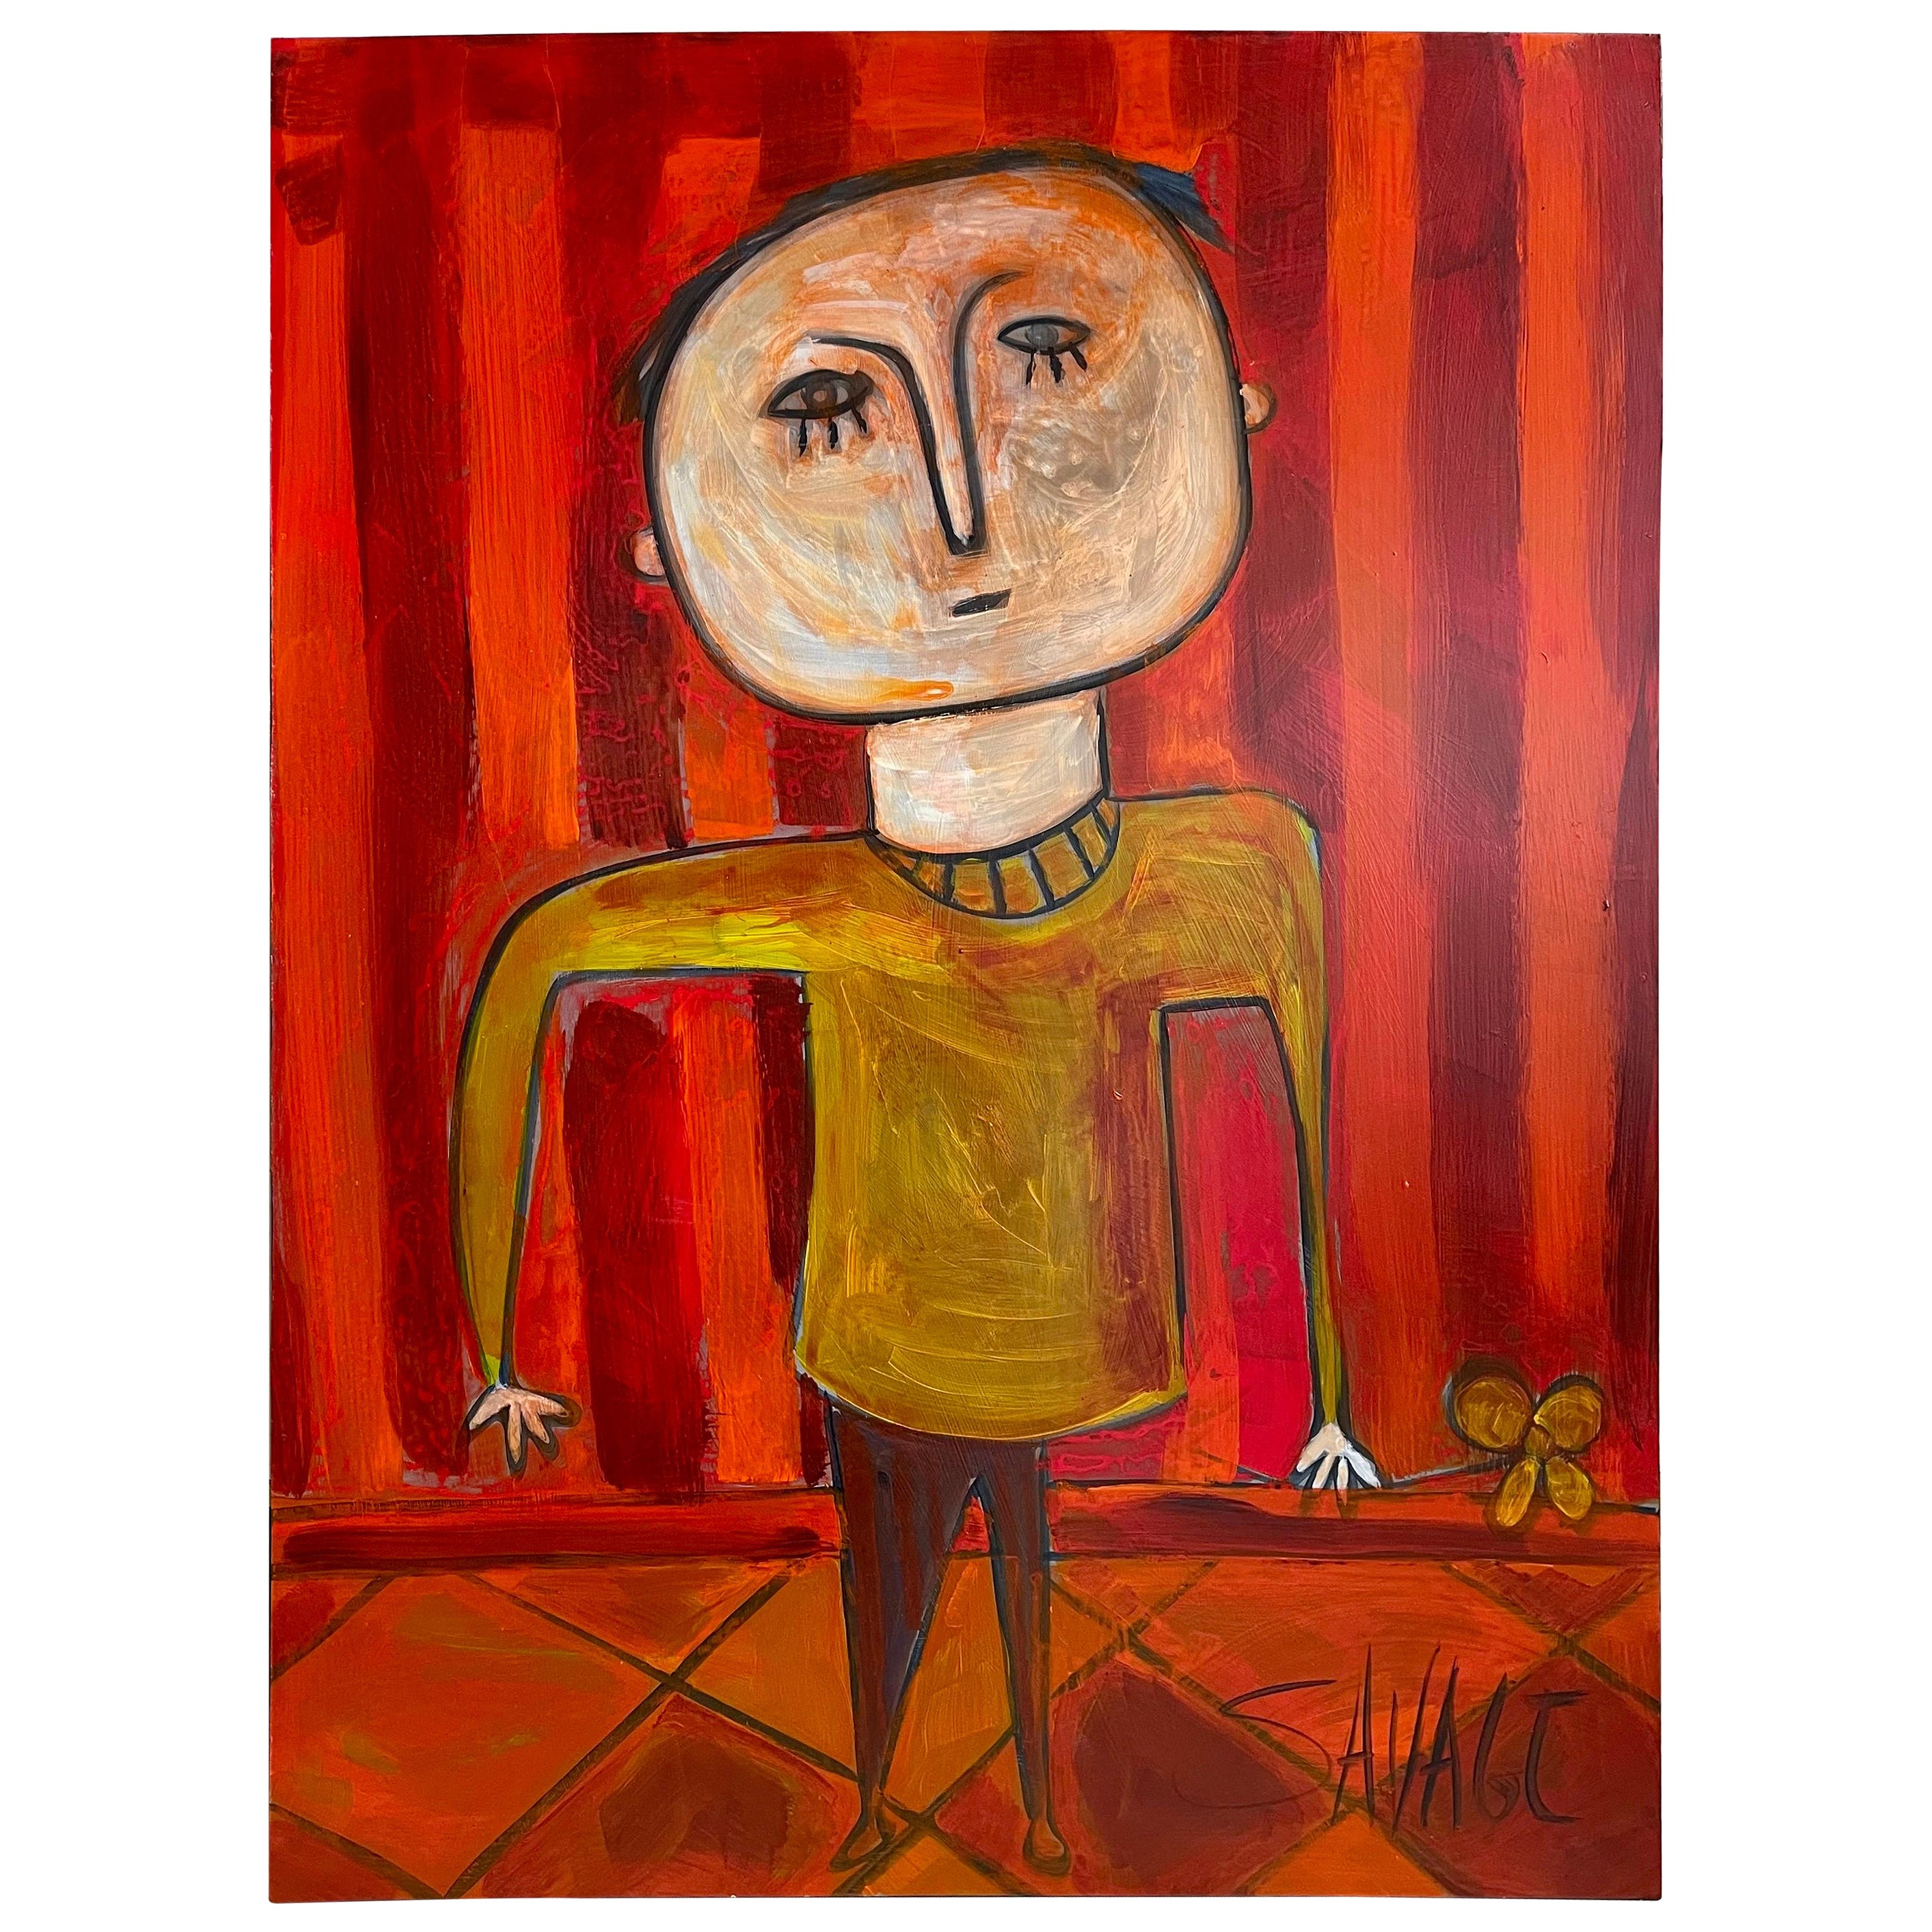 Whimsical Figural Abstract by Shawn Savage